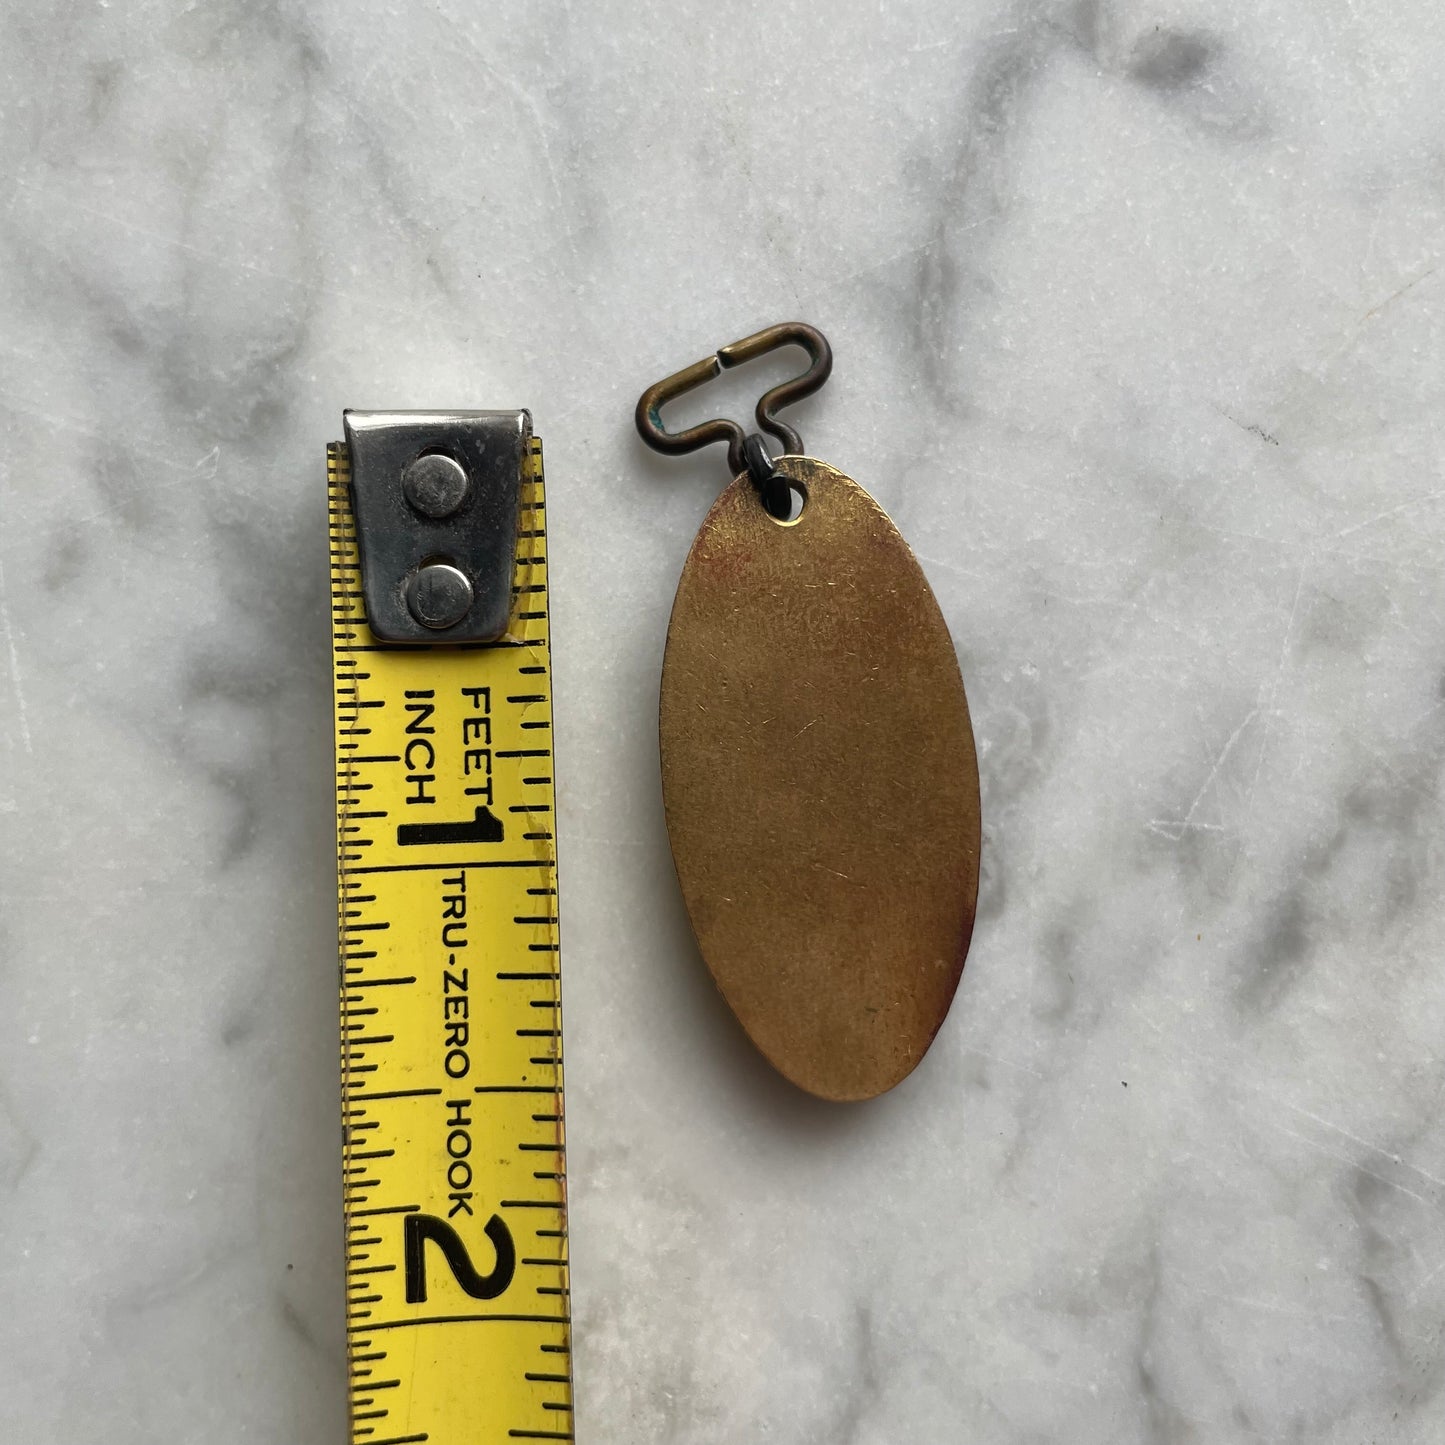 Naughty Vintage Watch Fob